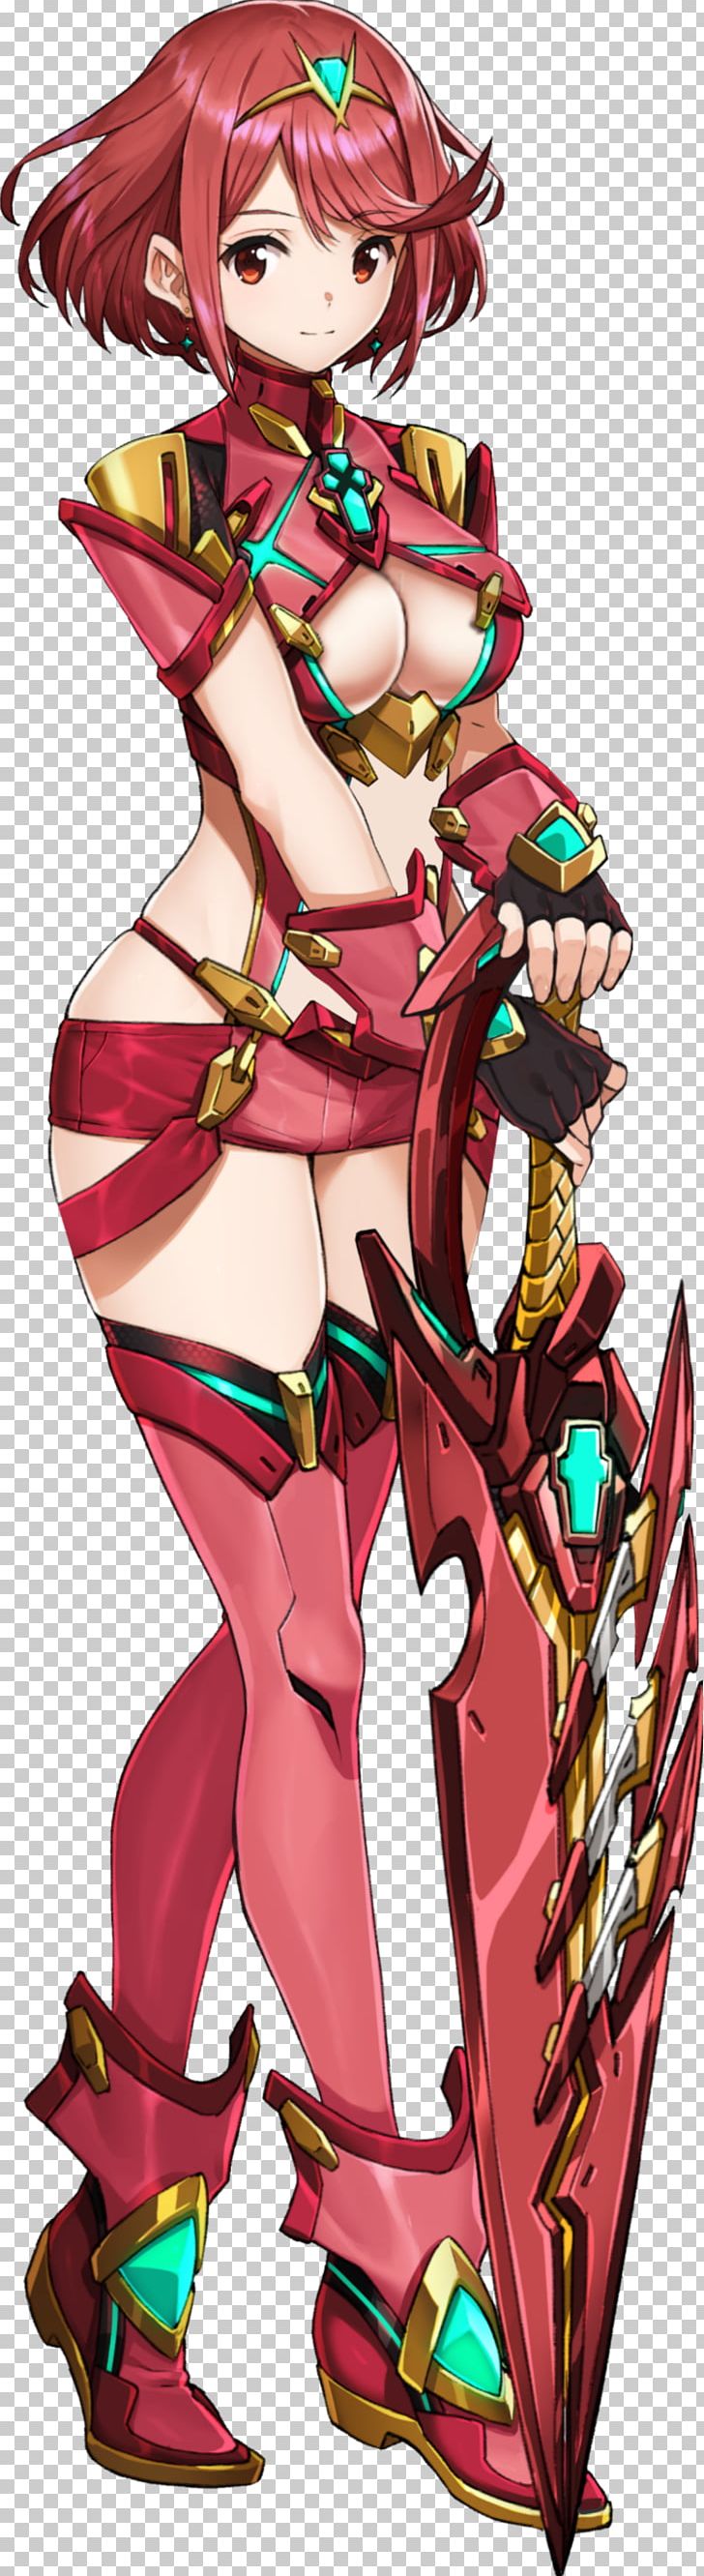 Xenoblade Chronicles 2 Wii Nintendo Switch PNG, Clipart, Anime, Anime Cartoon, Art, Cartoon, Chronicle Free PNG Download